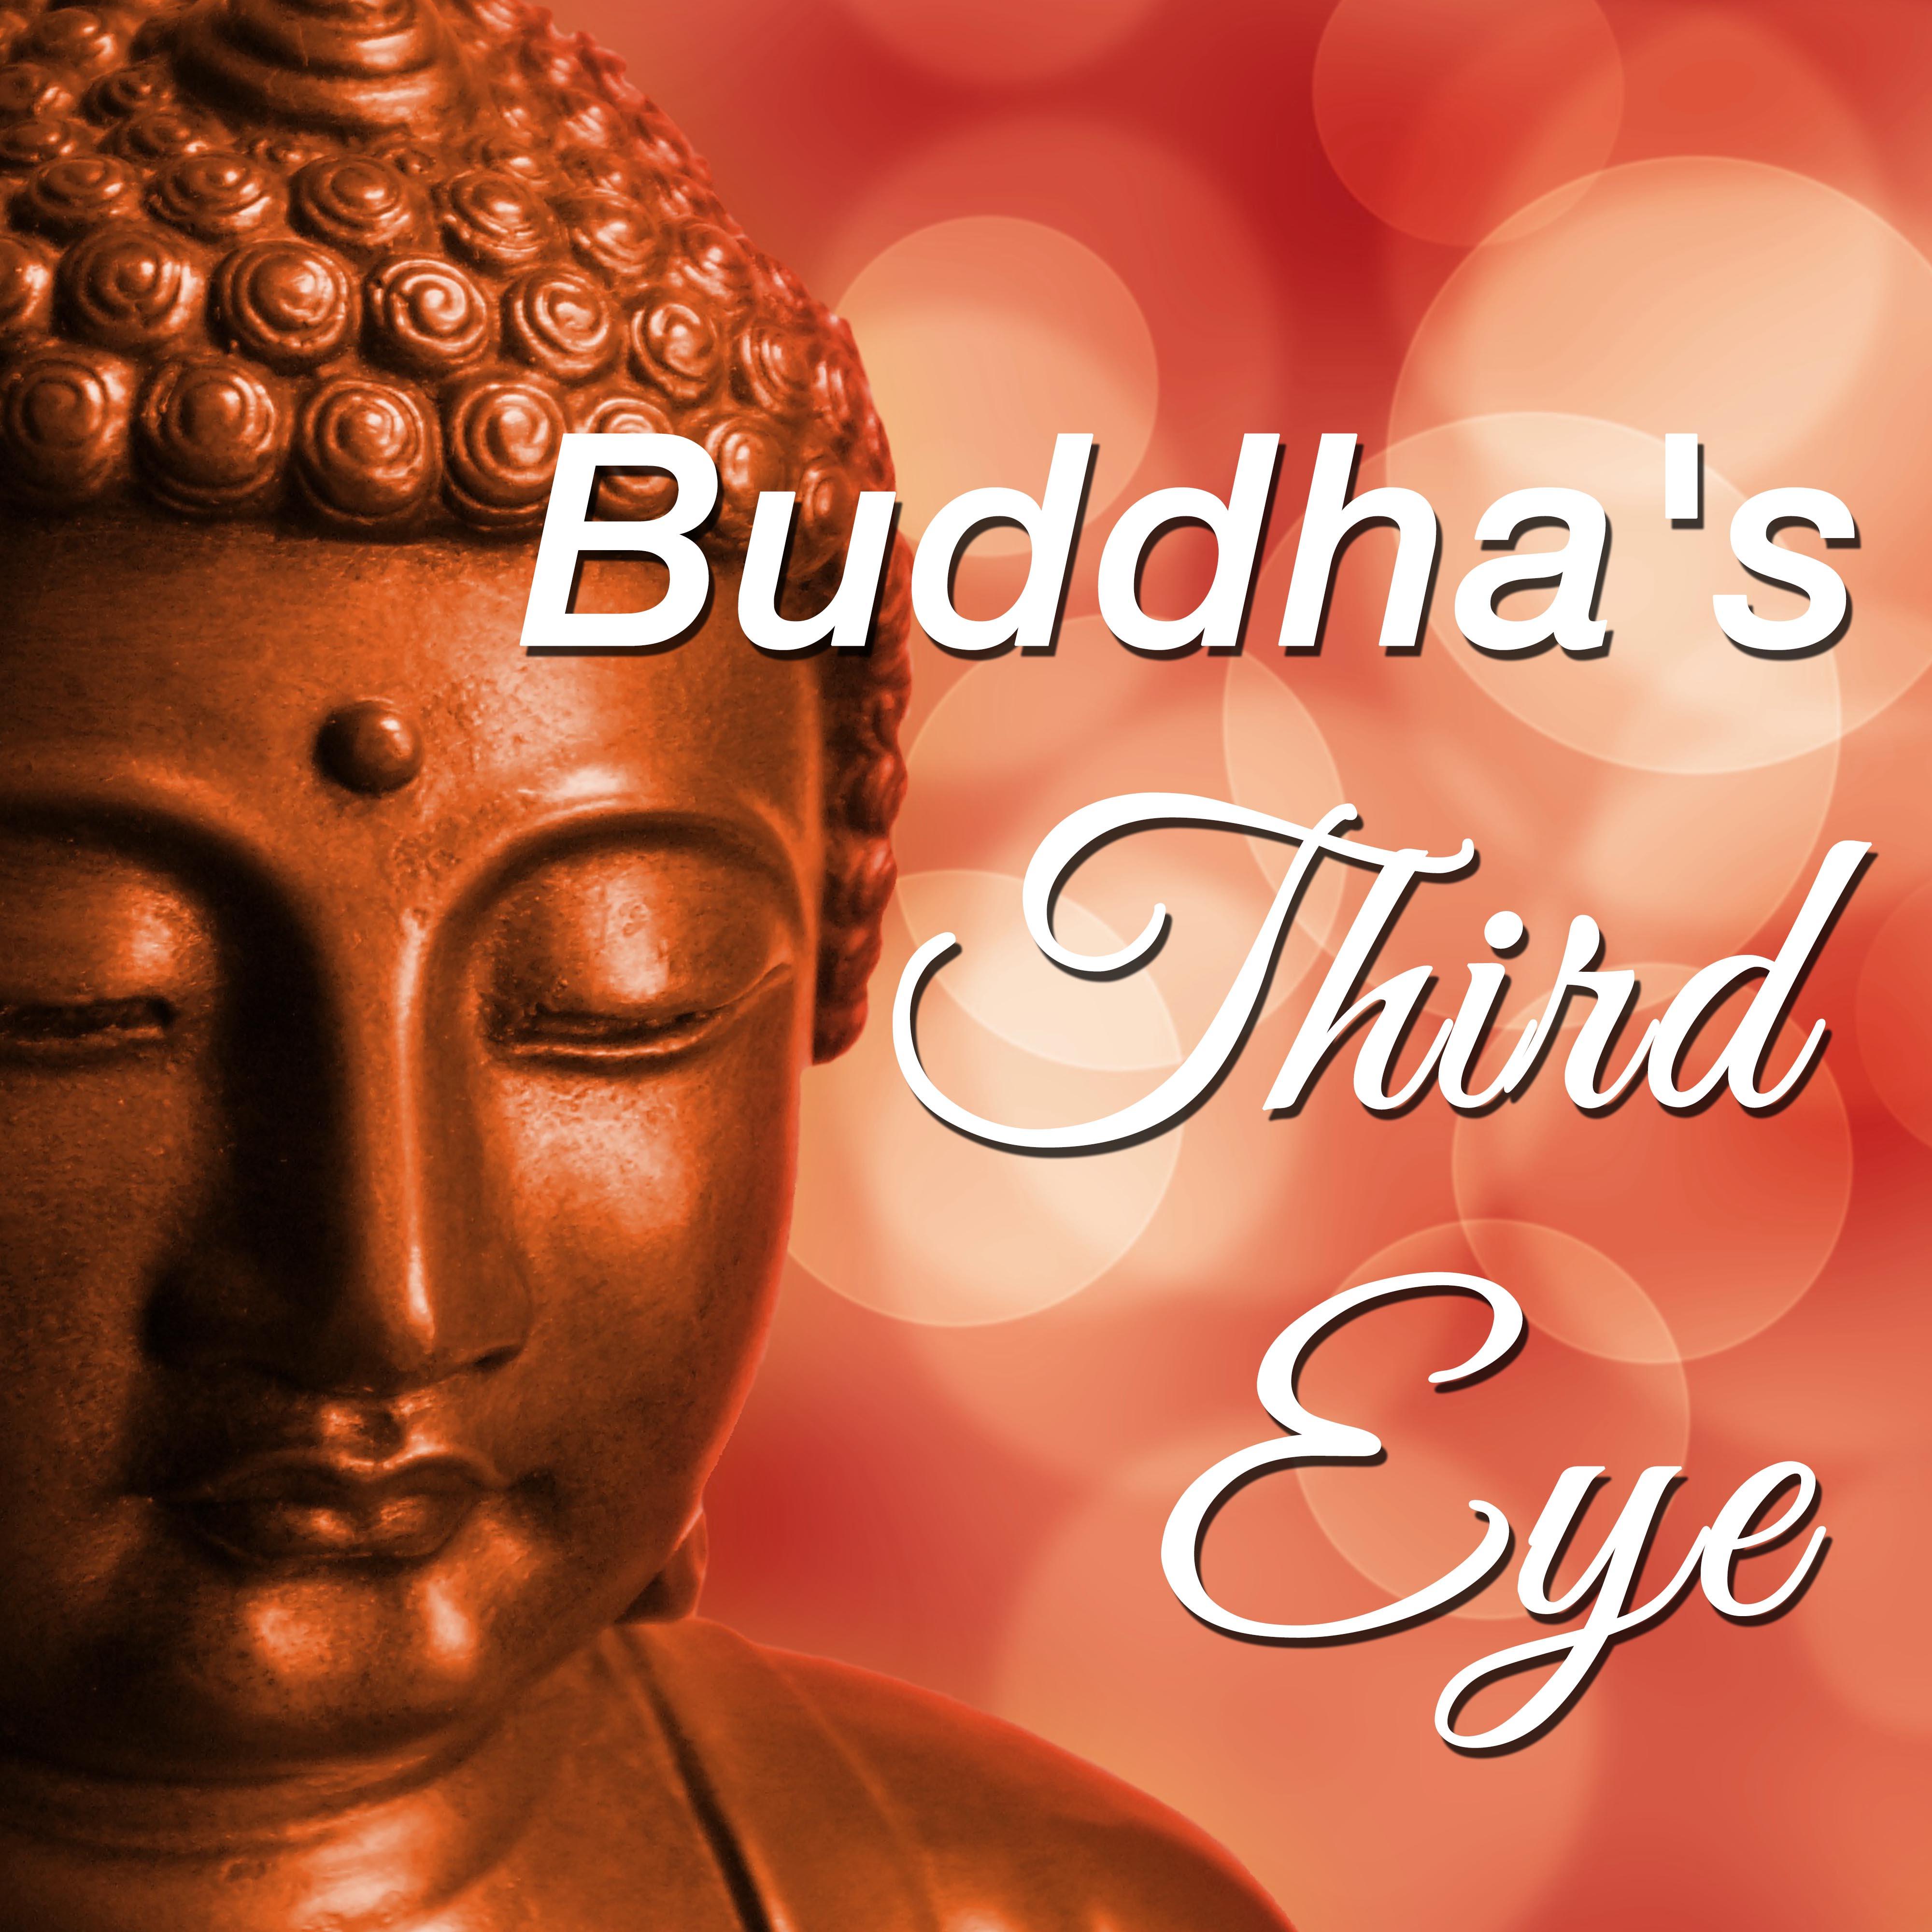 Buddha's Third Eye - Deep Yoga Meditation Music for Chakra Balancing, Inner Peace and Tranquility with Rain, Wind and Ocean Sounds